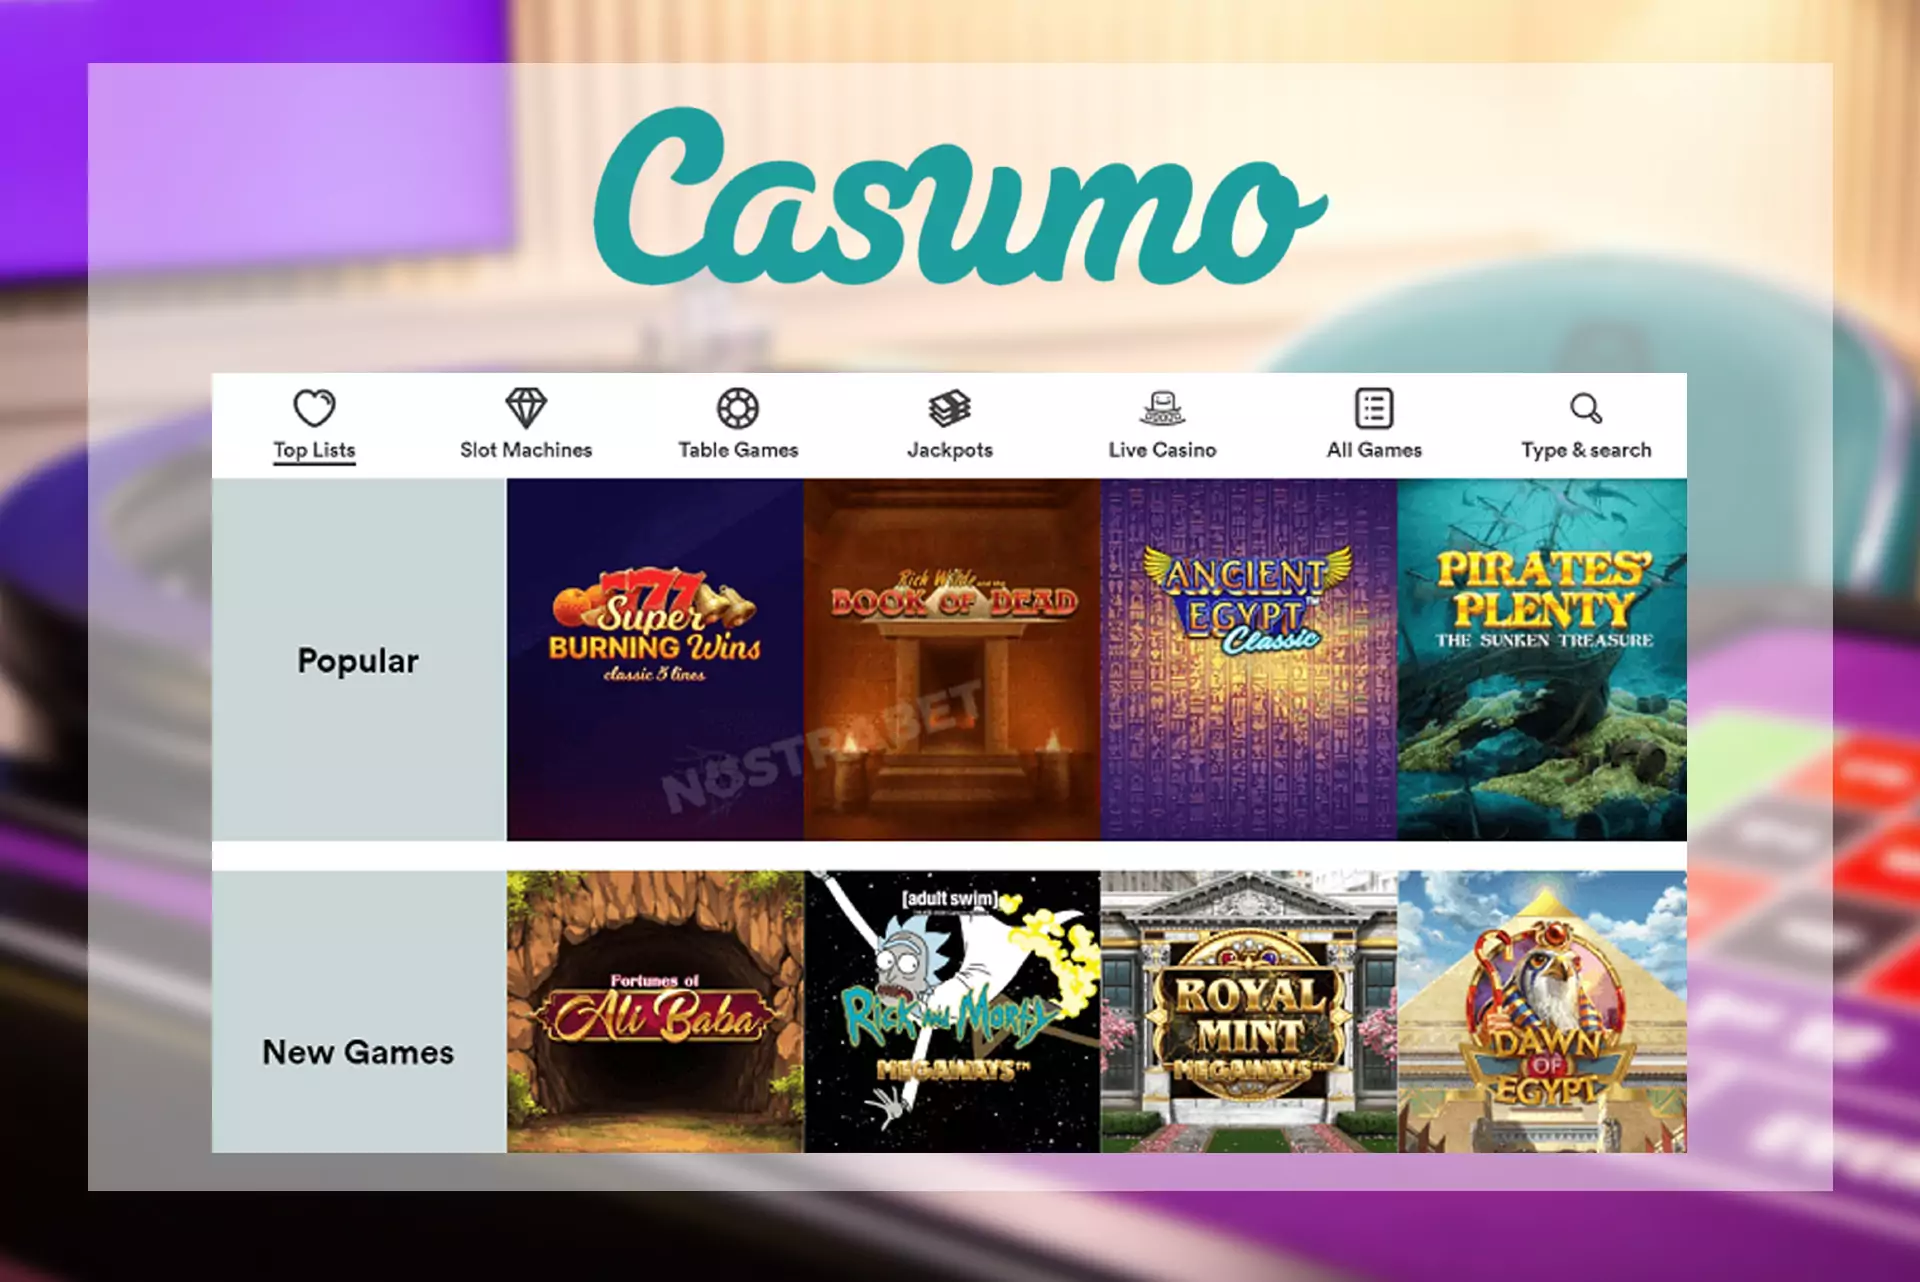 Play slots and classic table games in Casumo casino.